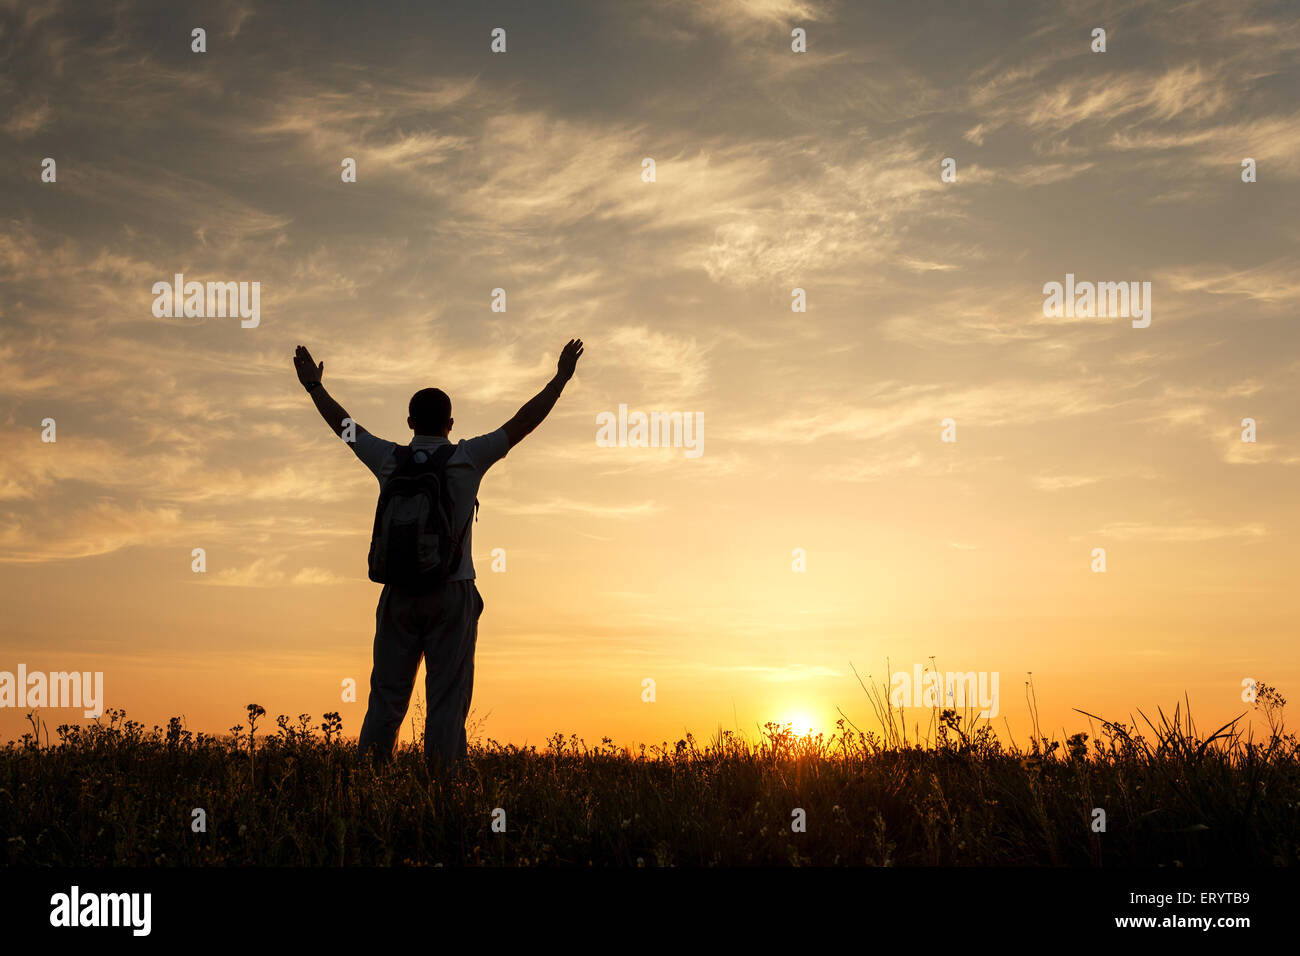 Silhouette of man with arms raised up and beautiful sky. Element of design. Summer sunset. Background Stock Photo